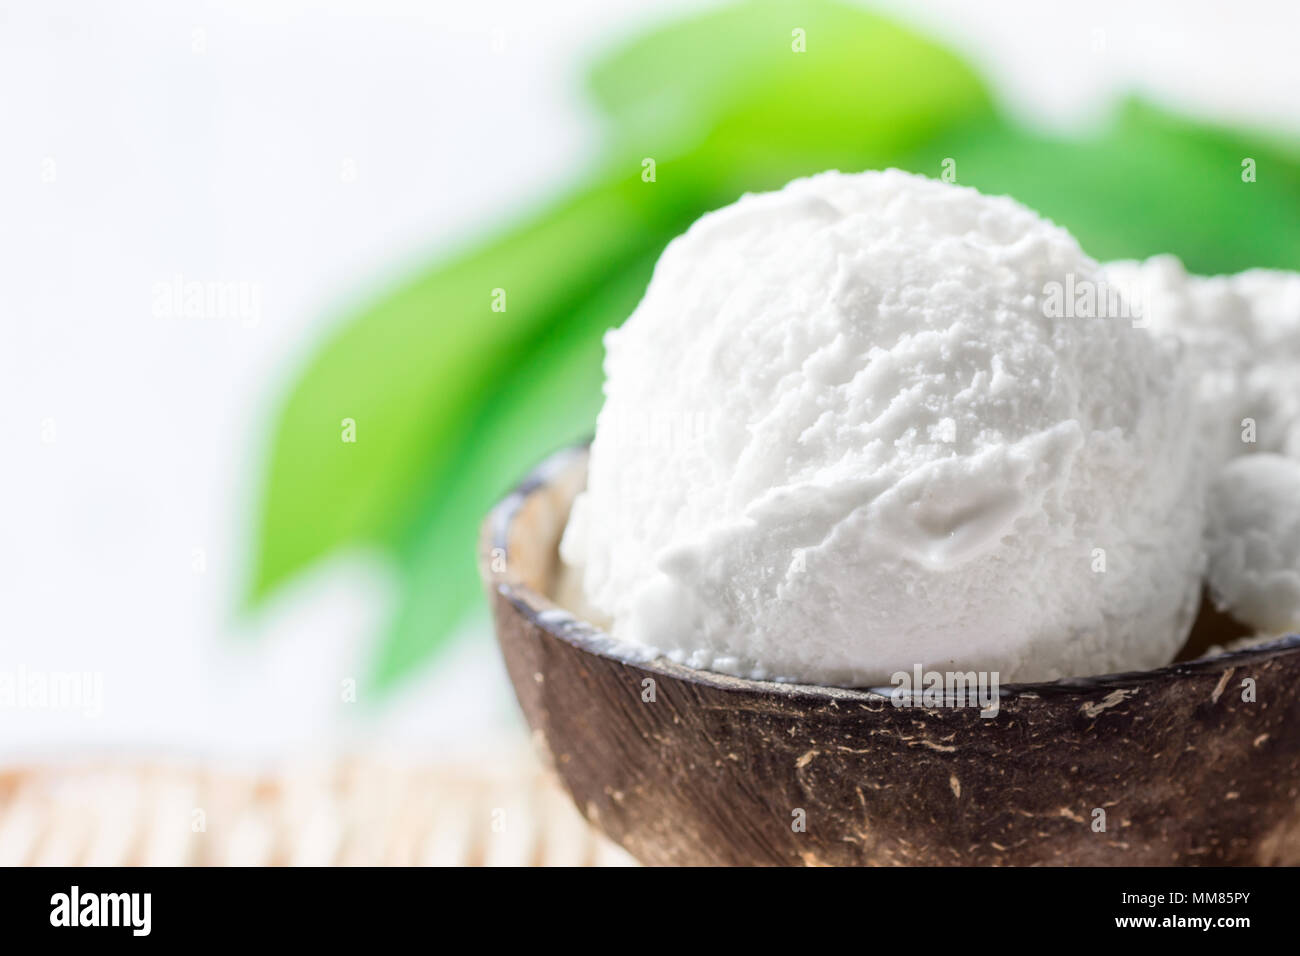 Delicious Vegan Coconut Ice Cream in Bowl on Wicker Table. Green Palm Leaves Tropical Plants Background. Plant Based Diet Healthy Dessert Superfoods.  Stock Photo